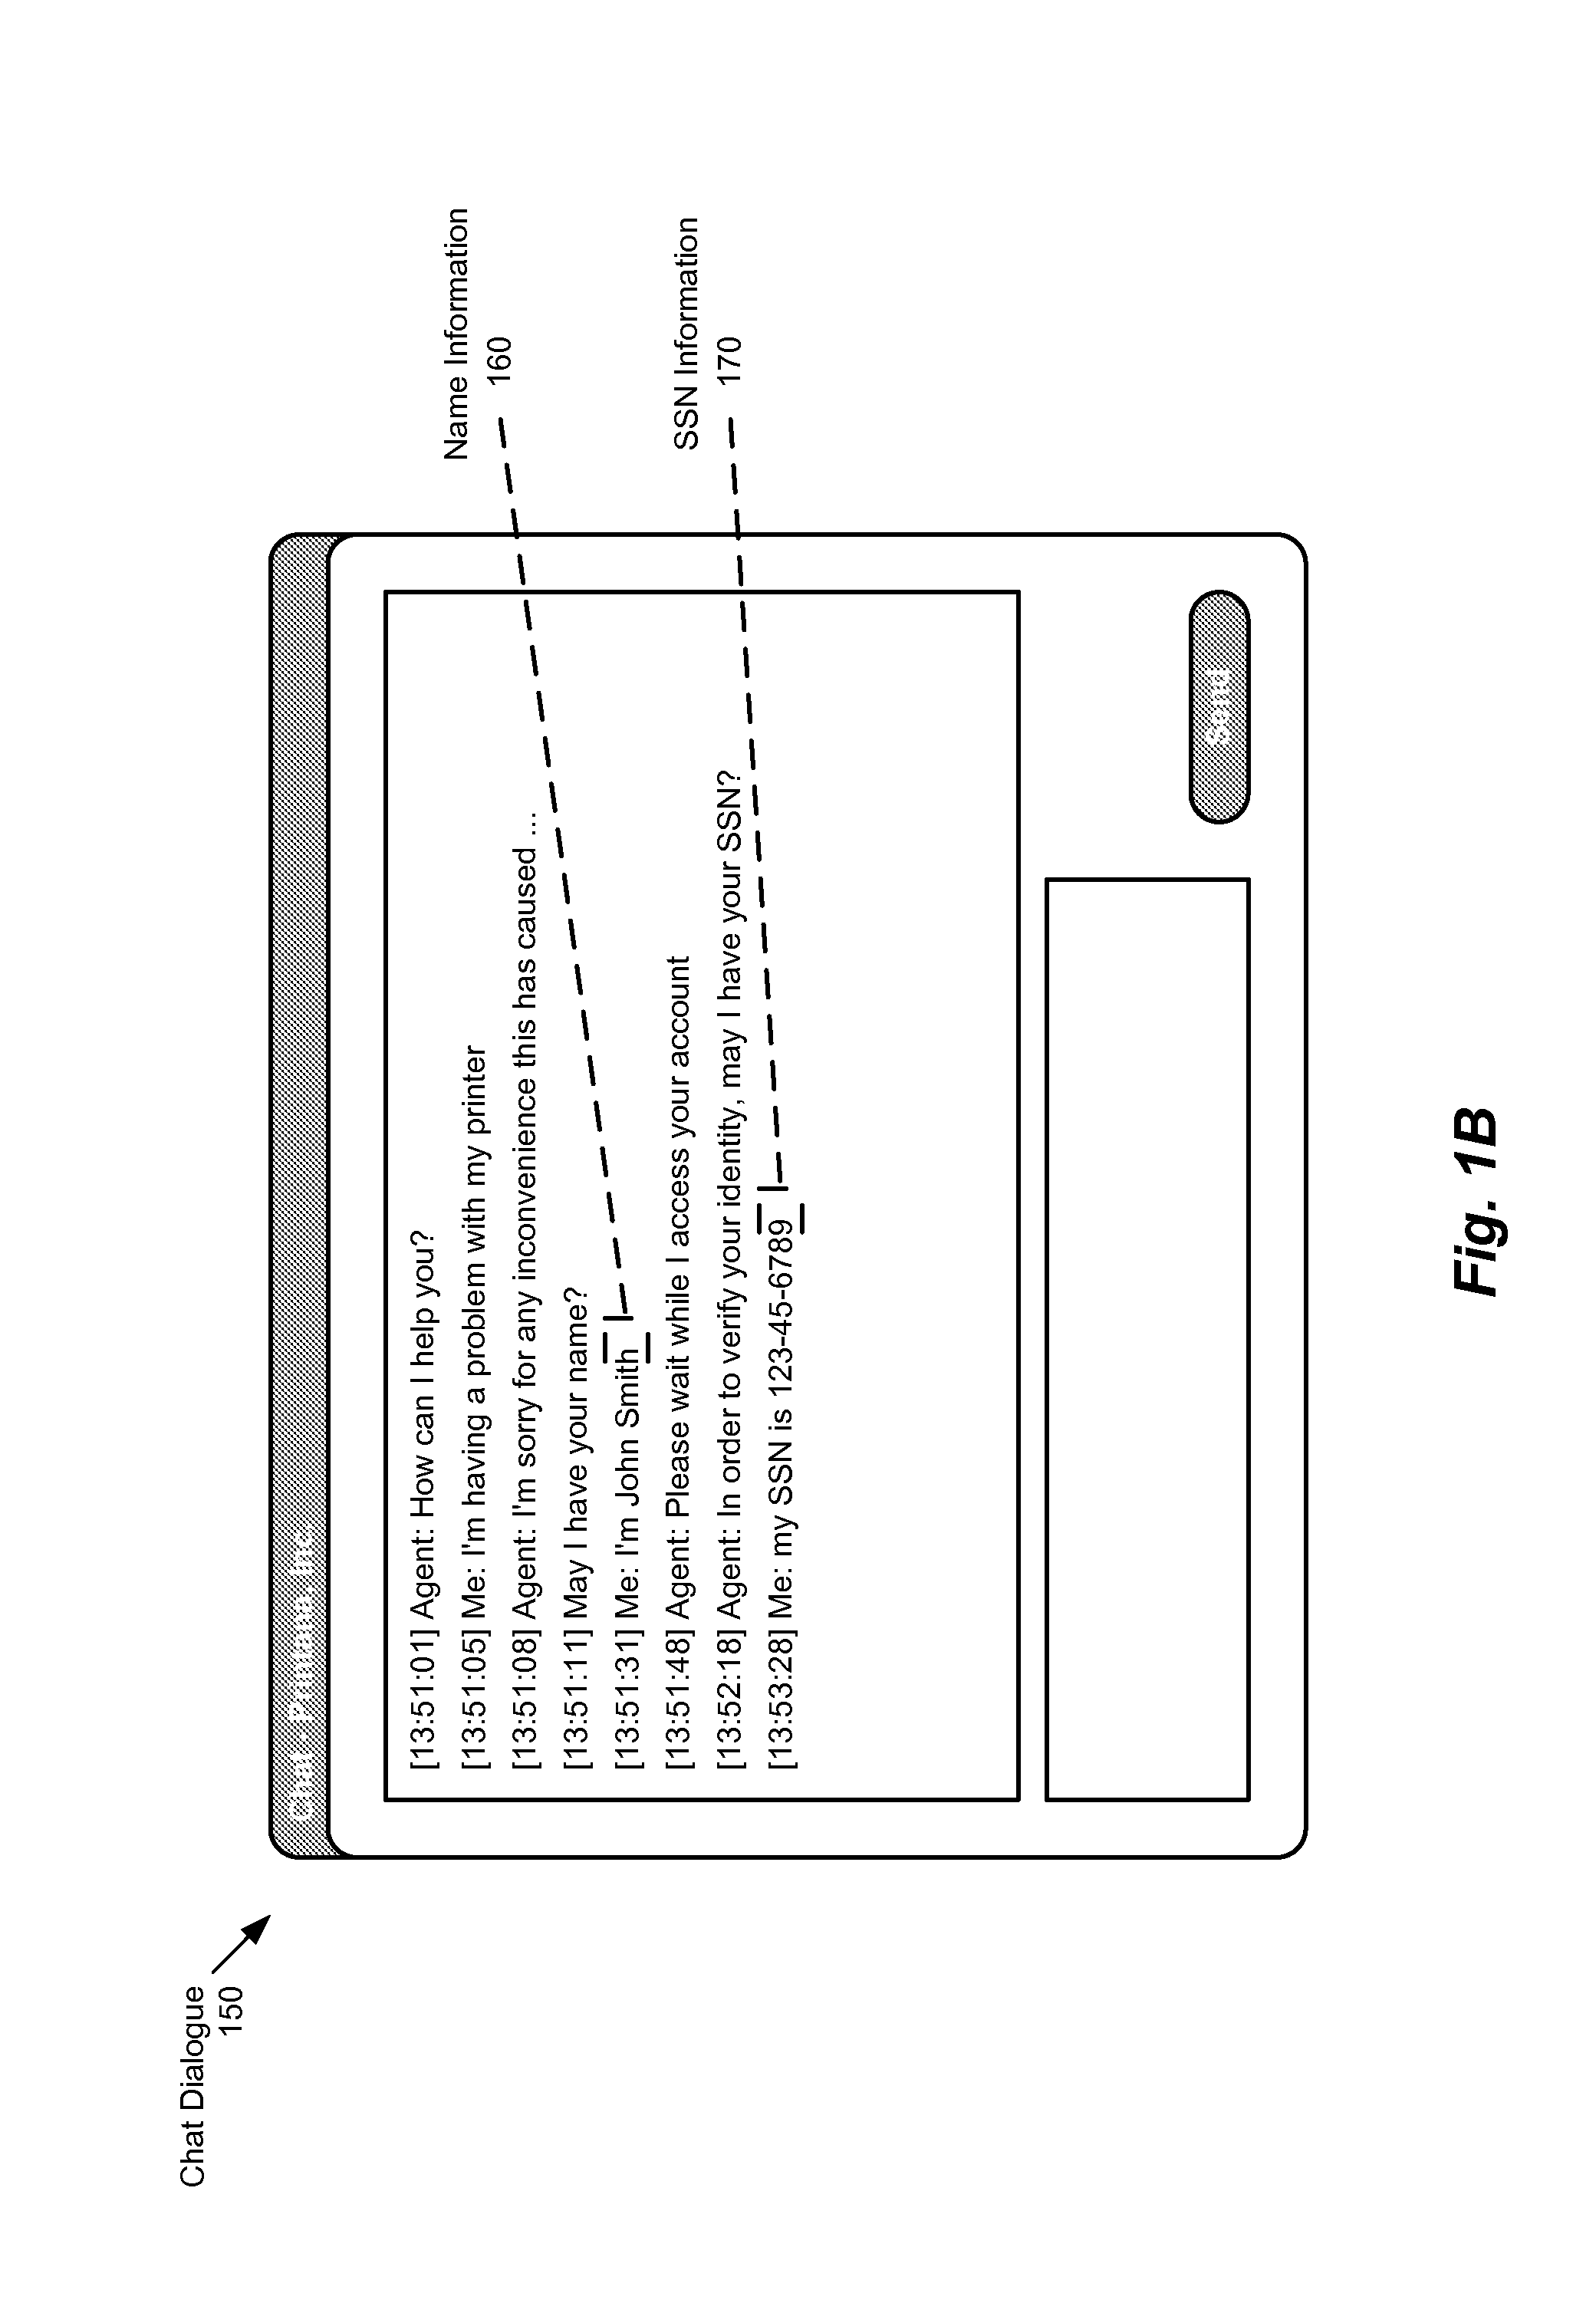 Messaging architecture configured to use an execution-enabled element to initiate an operation in an application